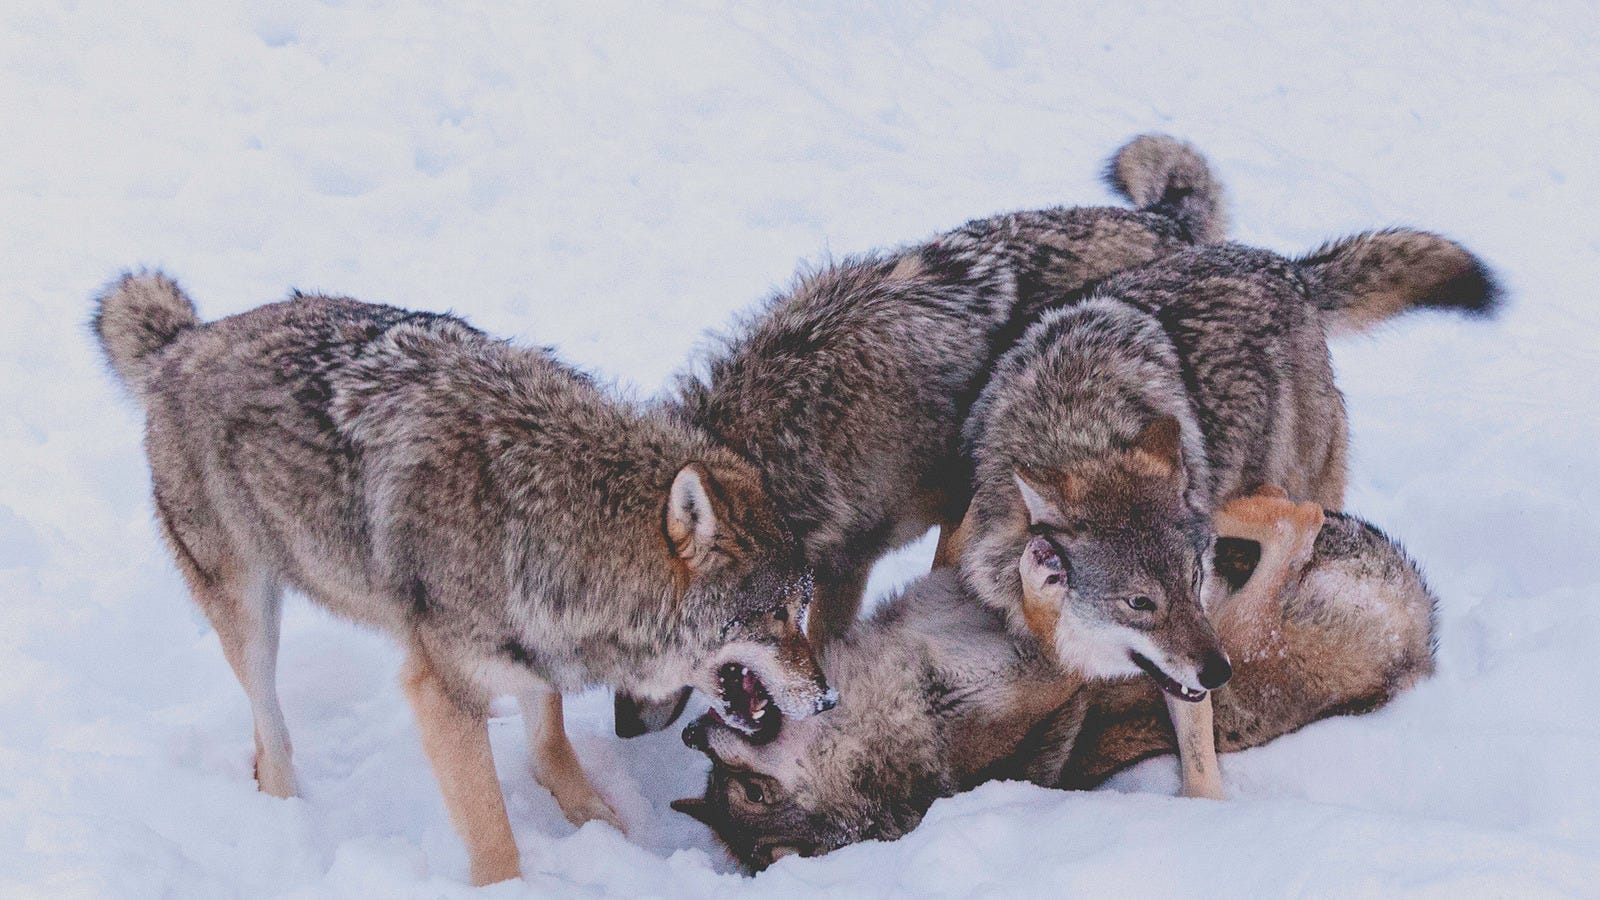 Can there be a good reason to kill twothirds of your wolves? Norway